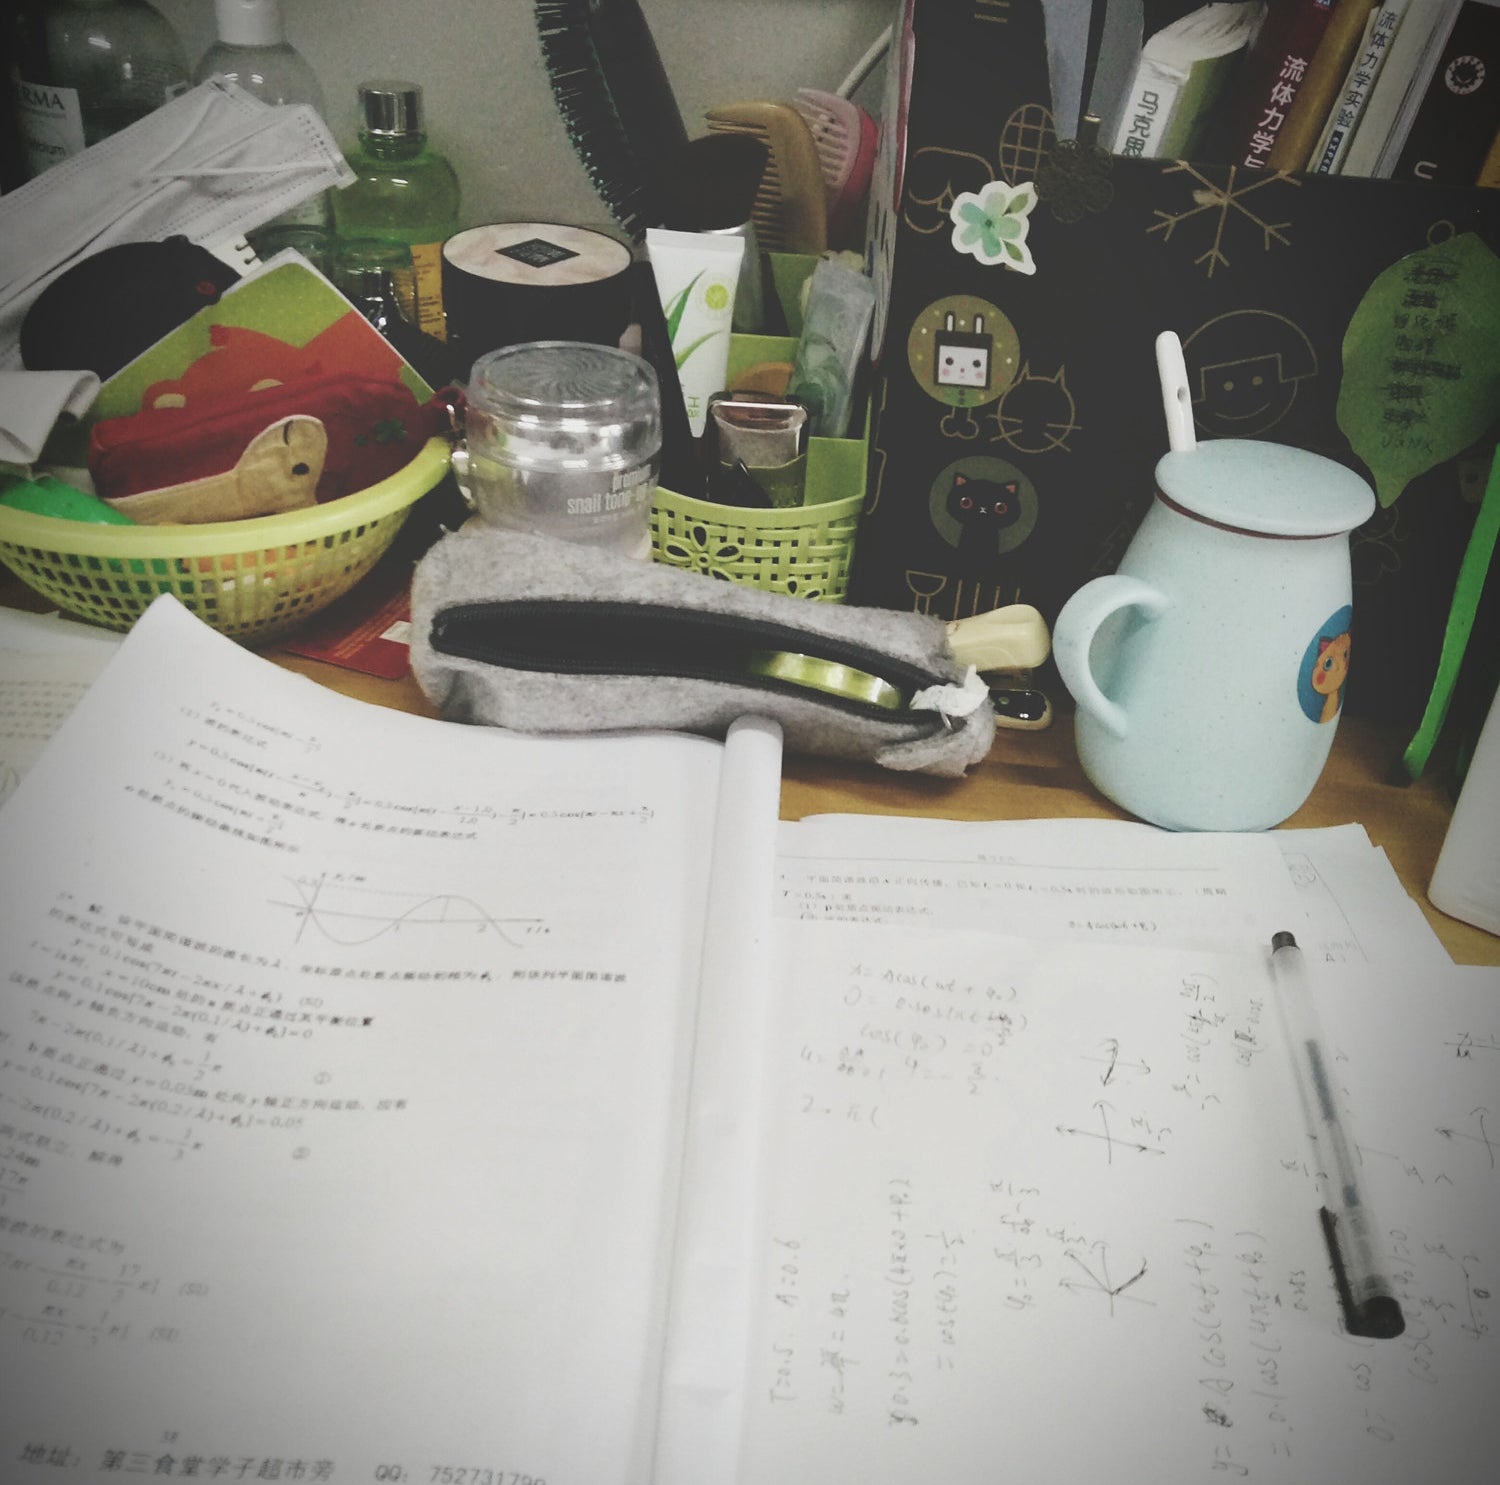 A crowded table with math homework